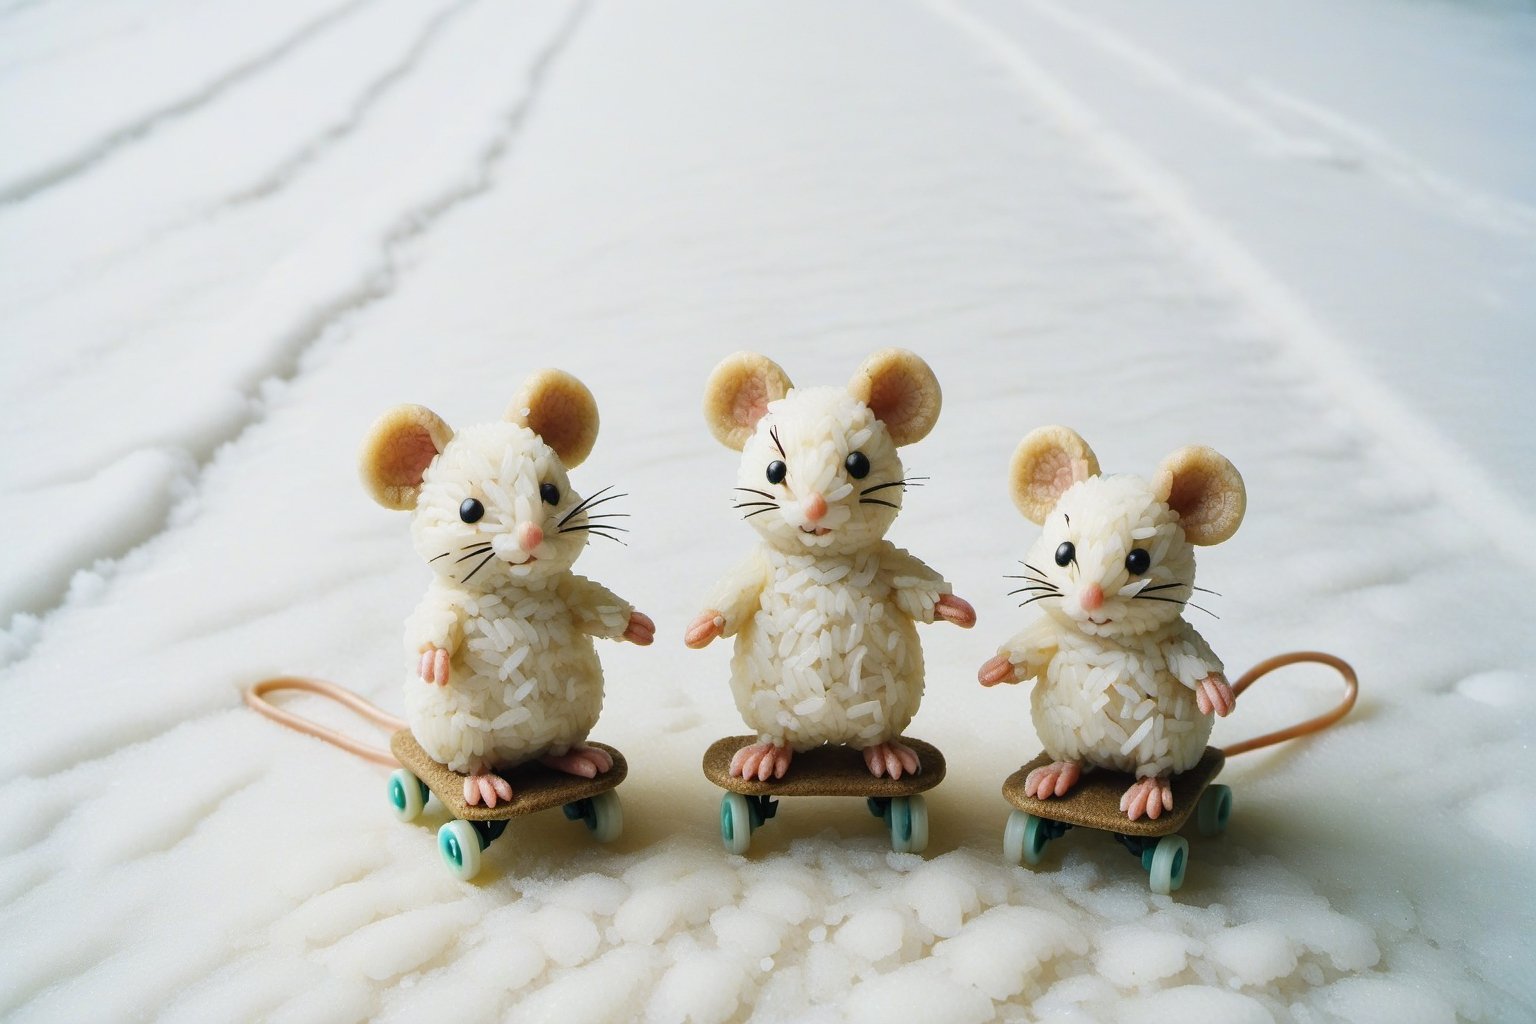 Vintage old photograph of two cute little mice made of rice skating in the snow. Canon 5d Mark 4, Kodak Ektar, ,styr